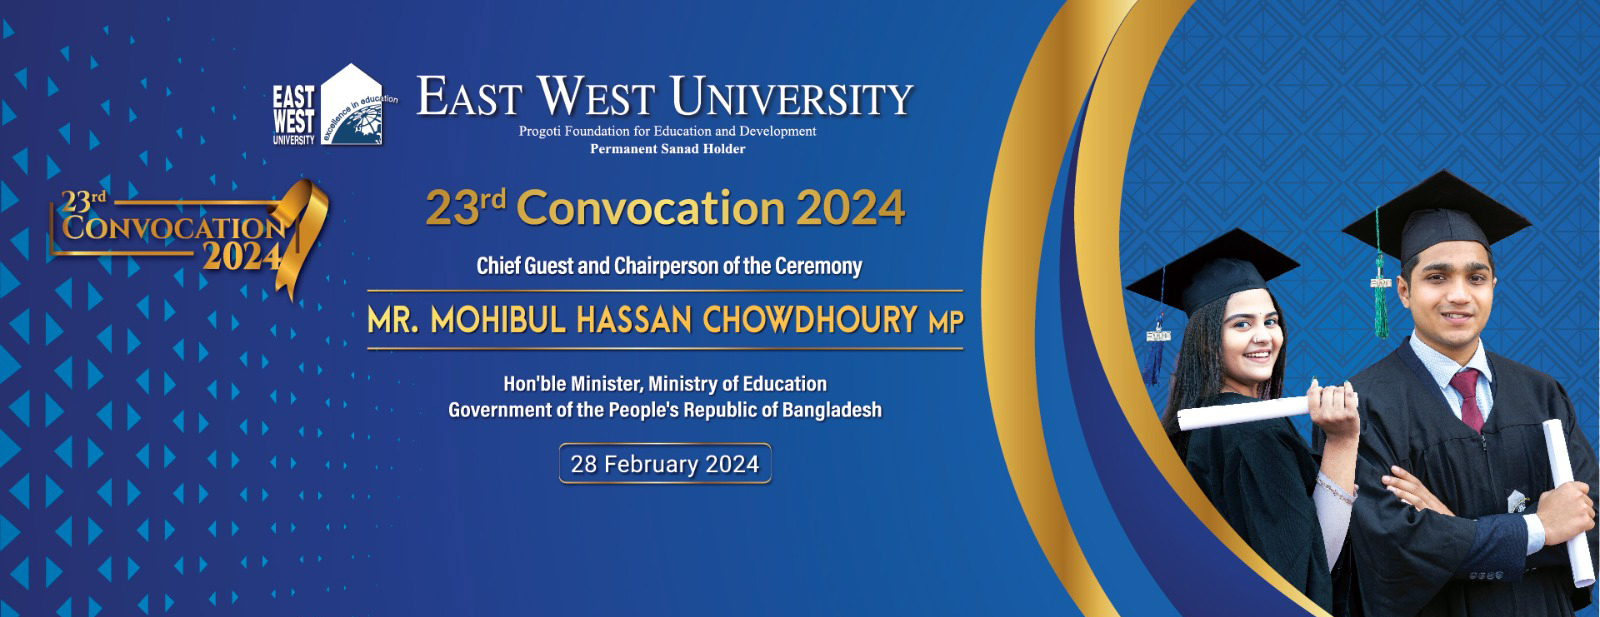 23RD CONVOCATION 2024, EAST WEST UNIVERSITY